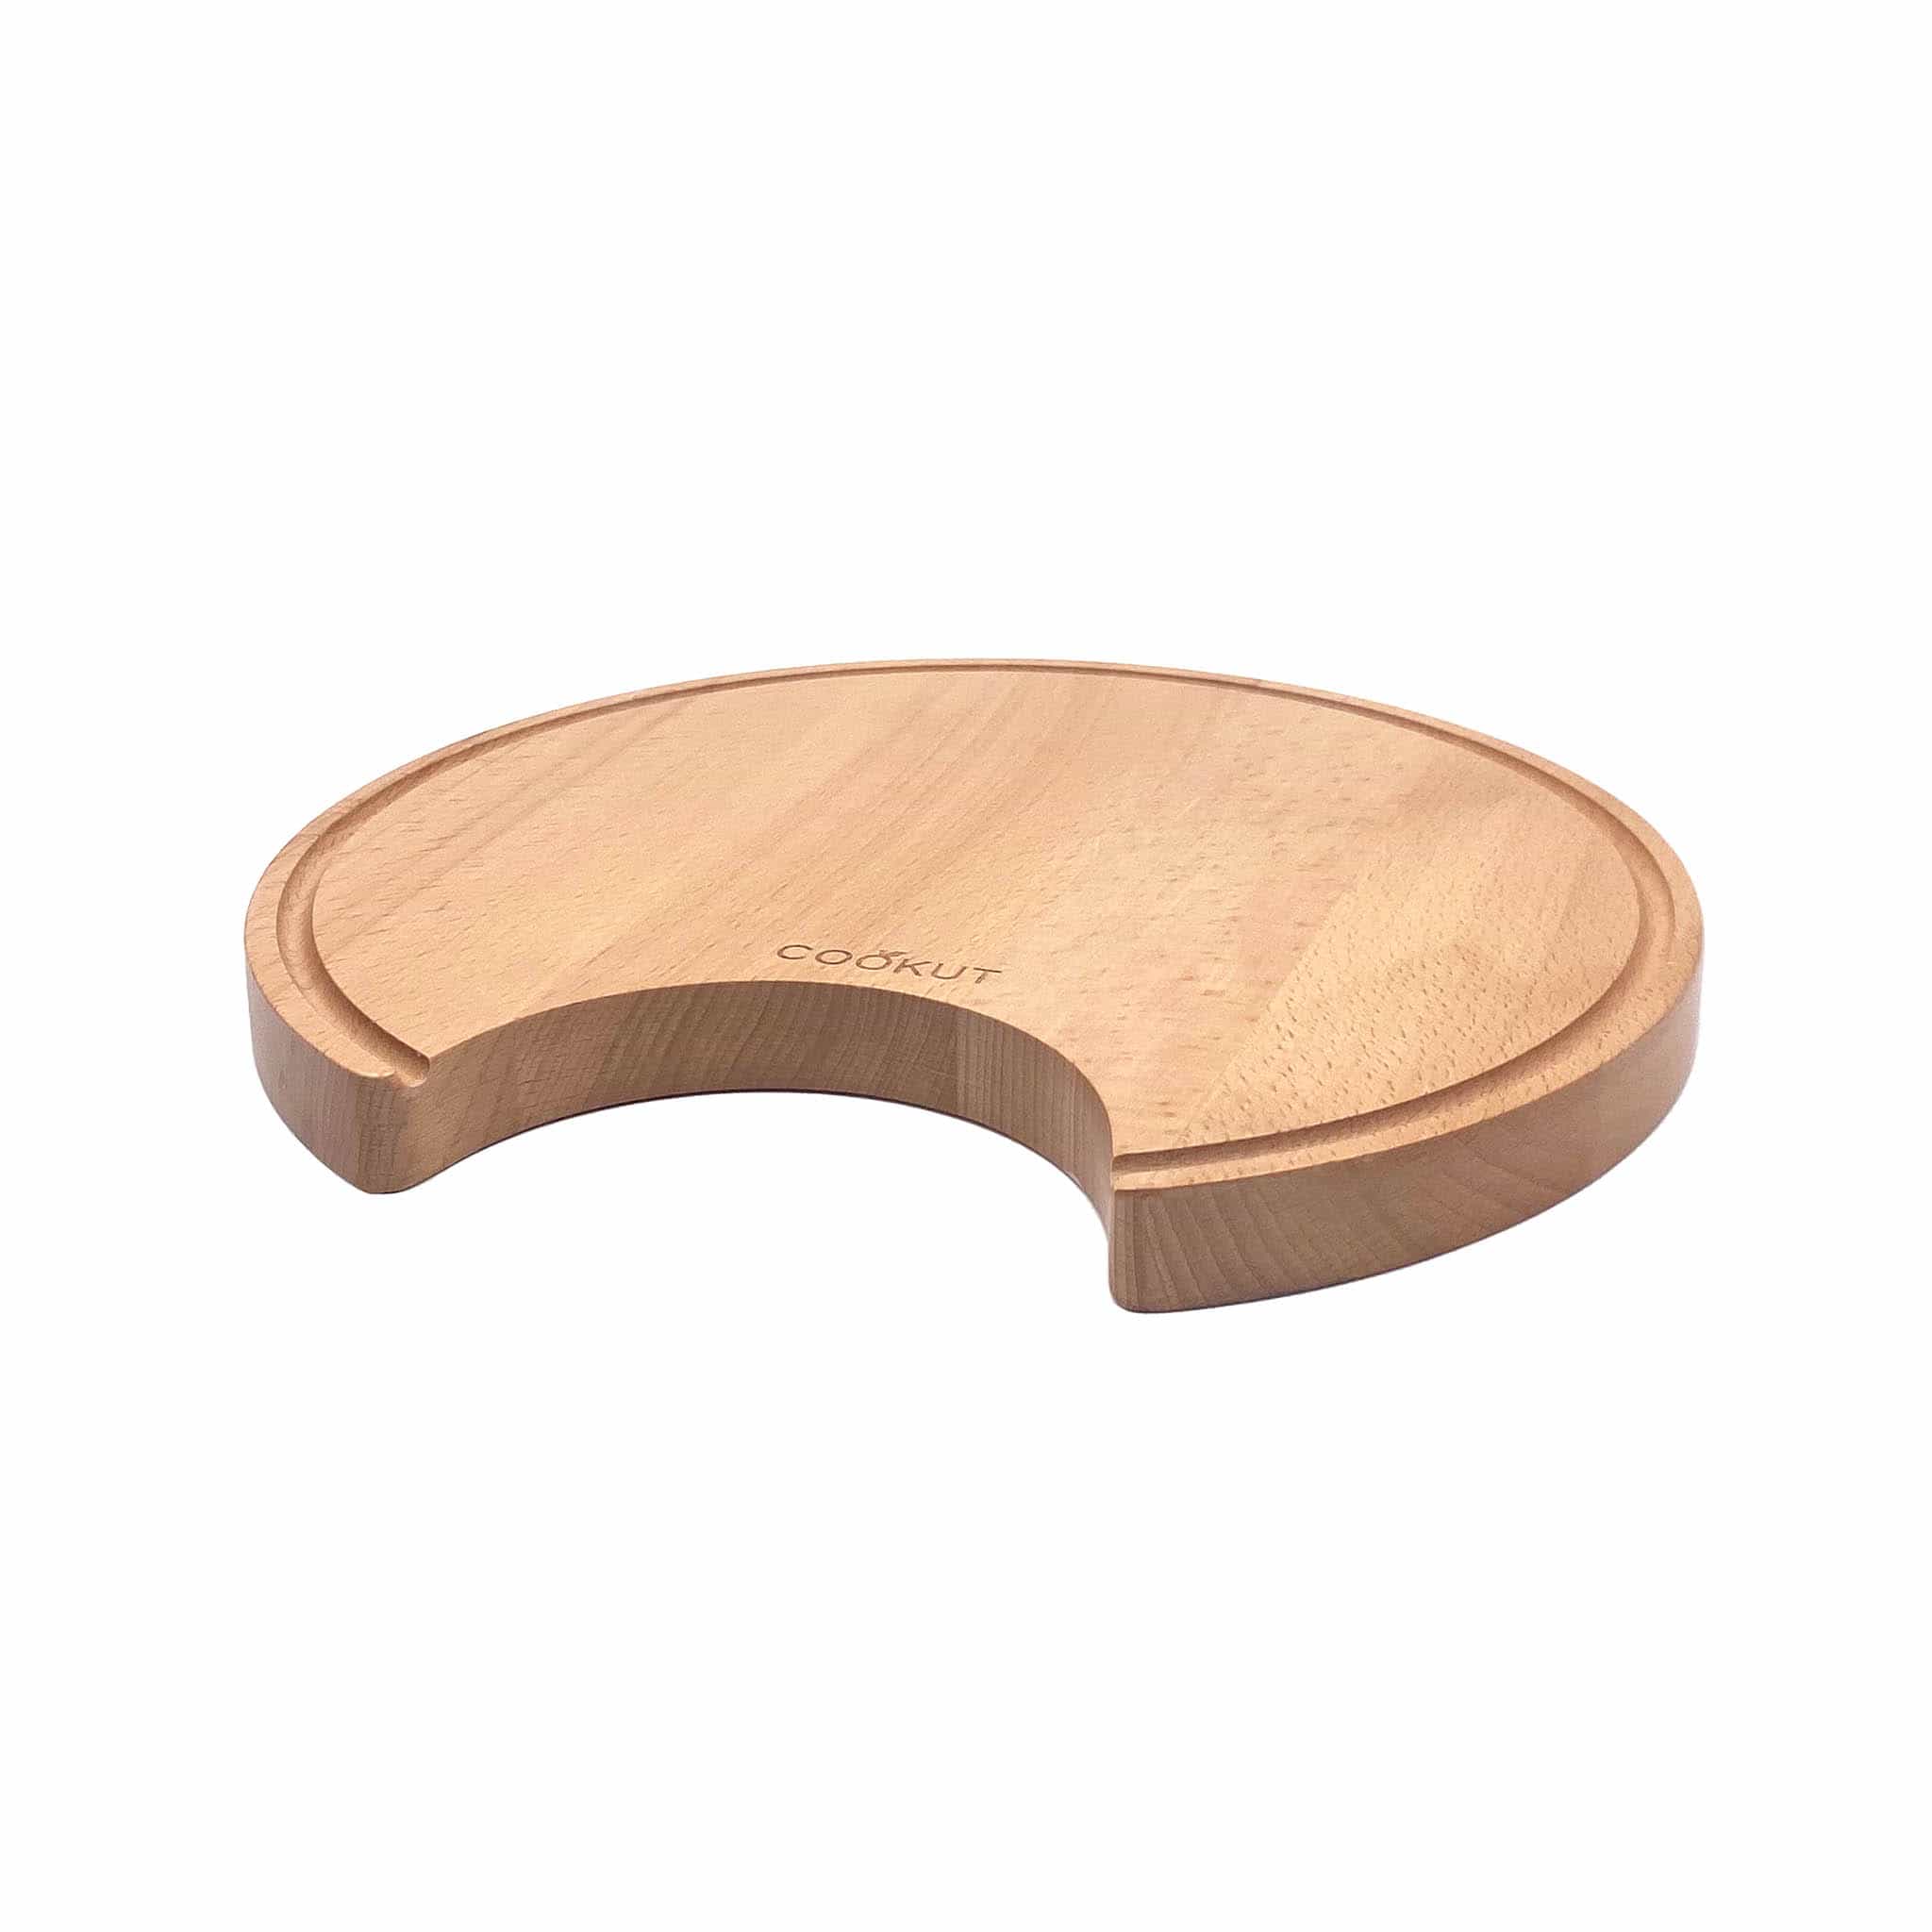 Cookut Wooden Chopping Board